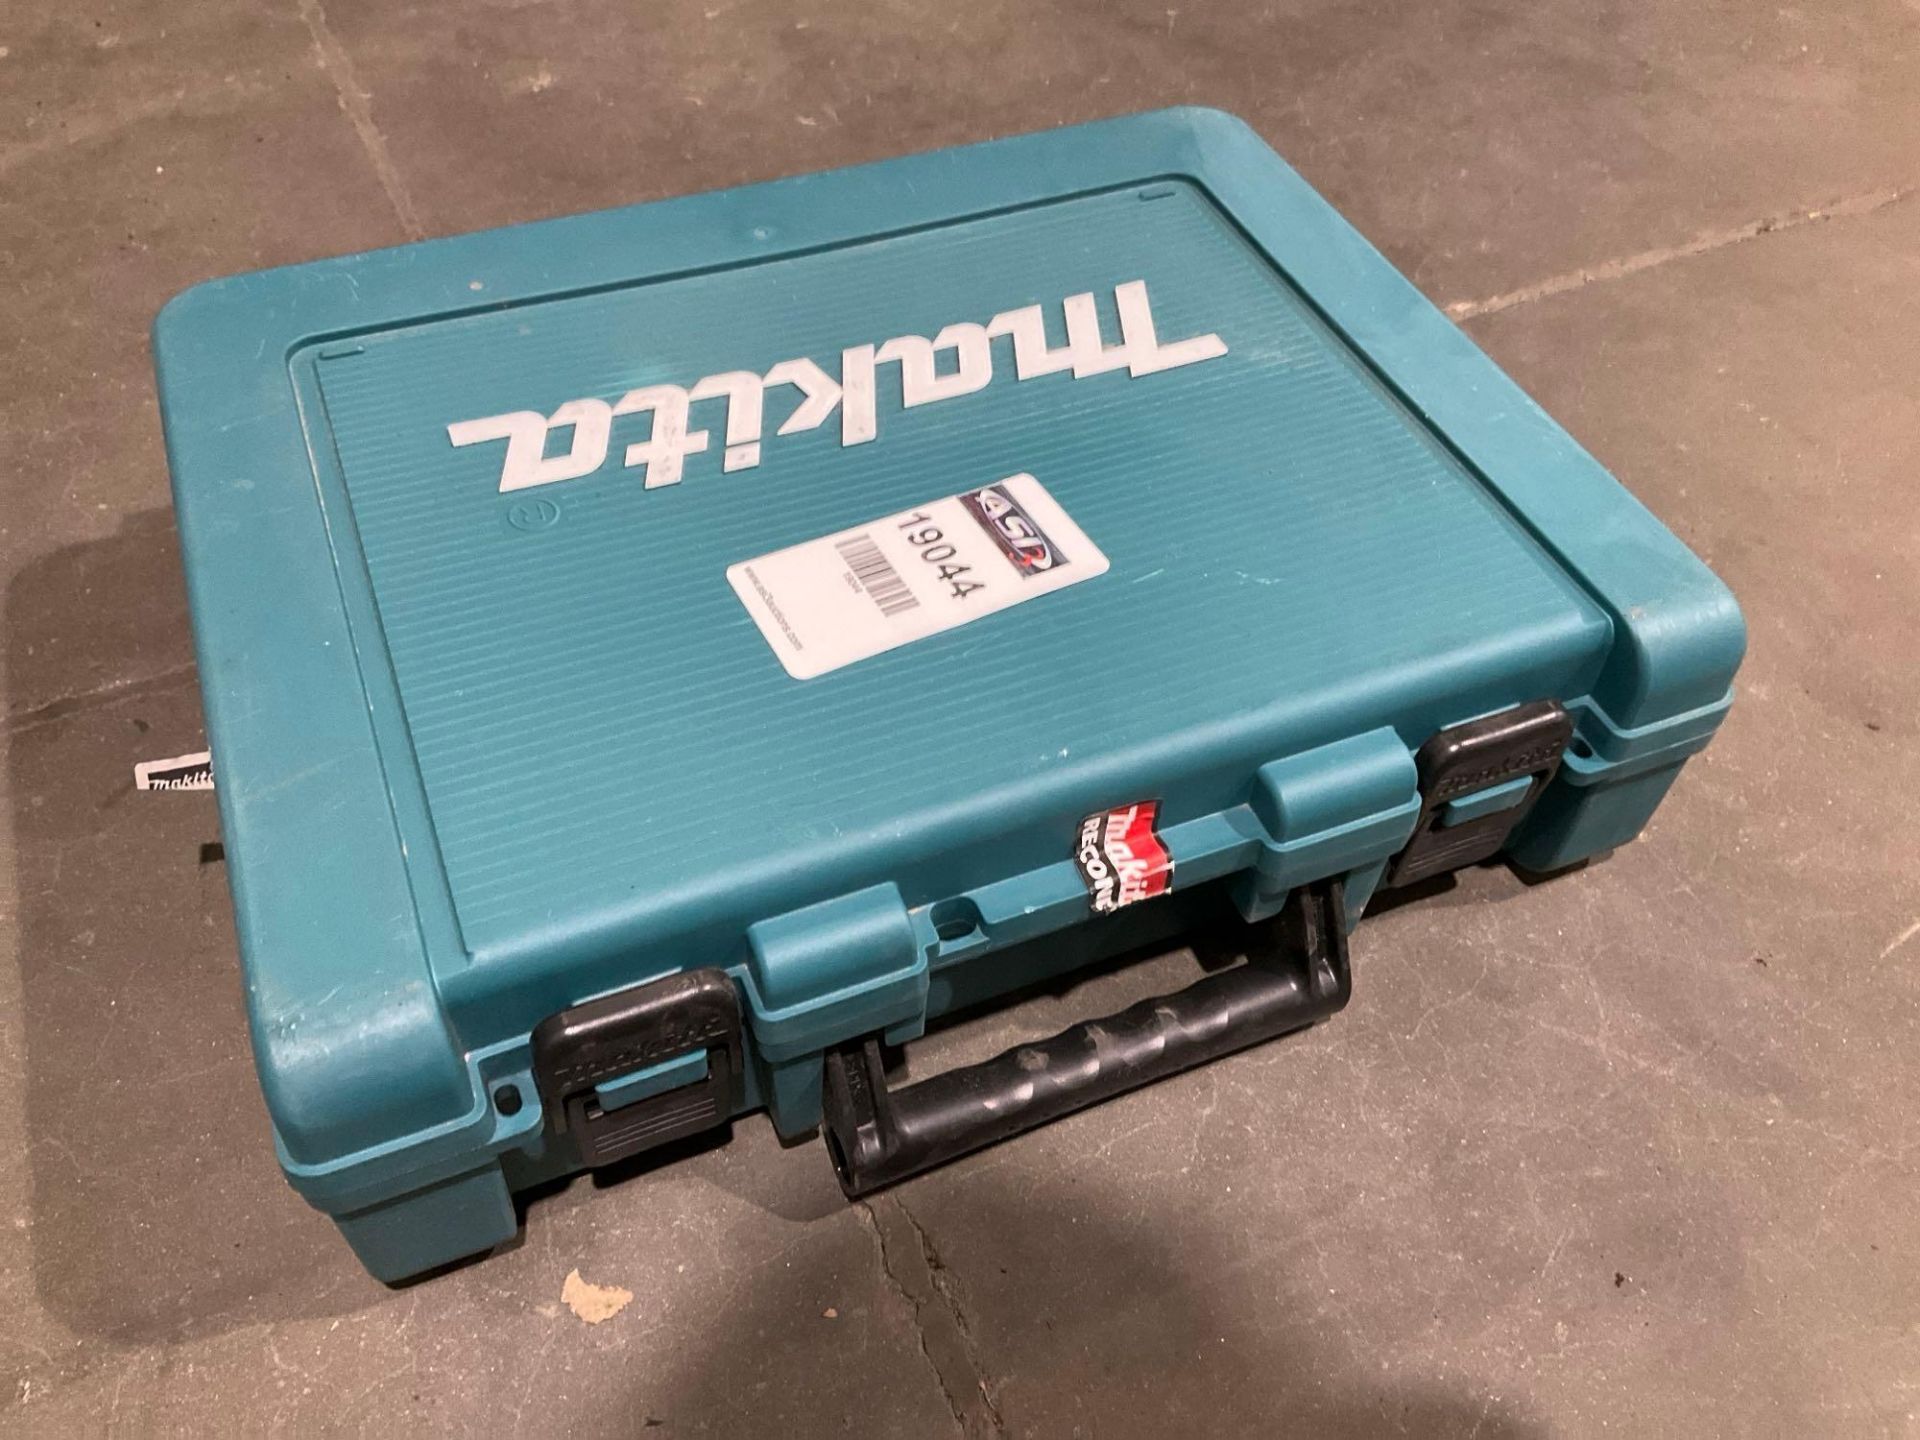 MAKITA ROTARY HAMMER MODEL HR2811F IN CARRYING CASE, RECONDITIONED - Image 5 of 6